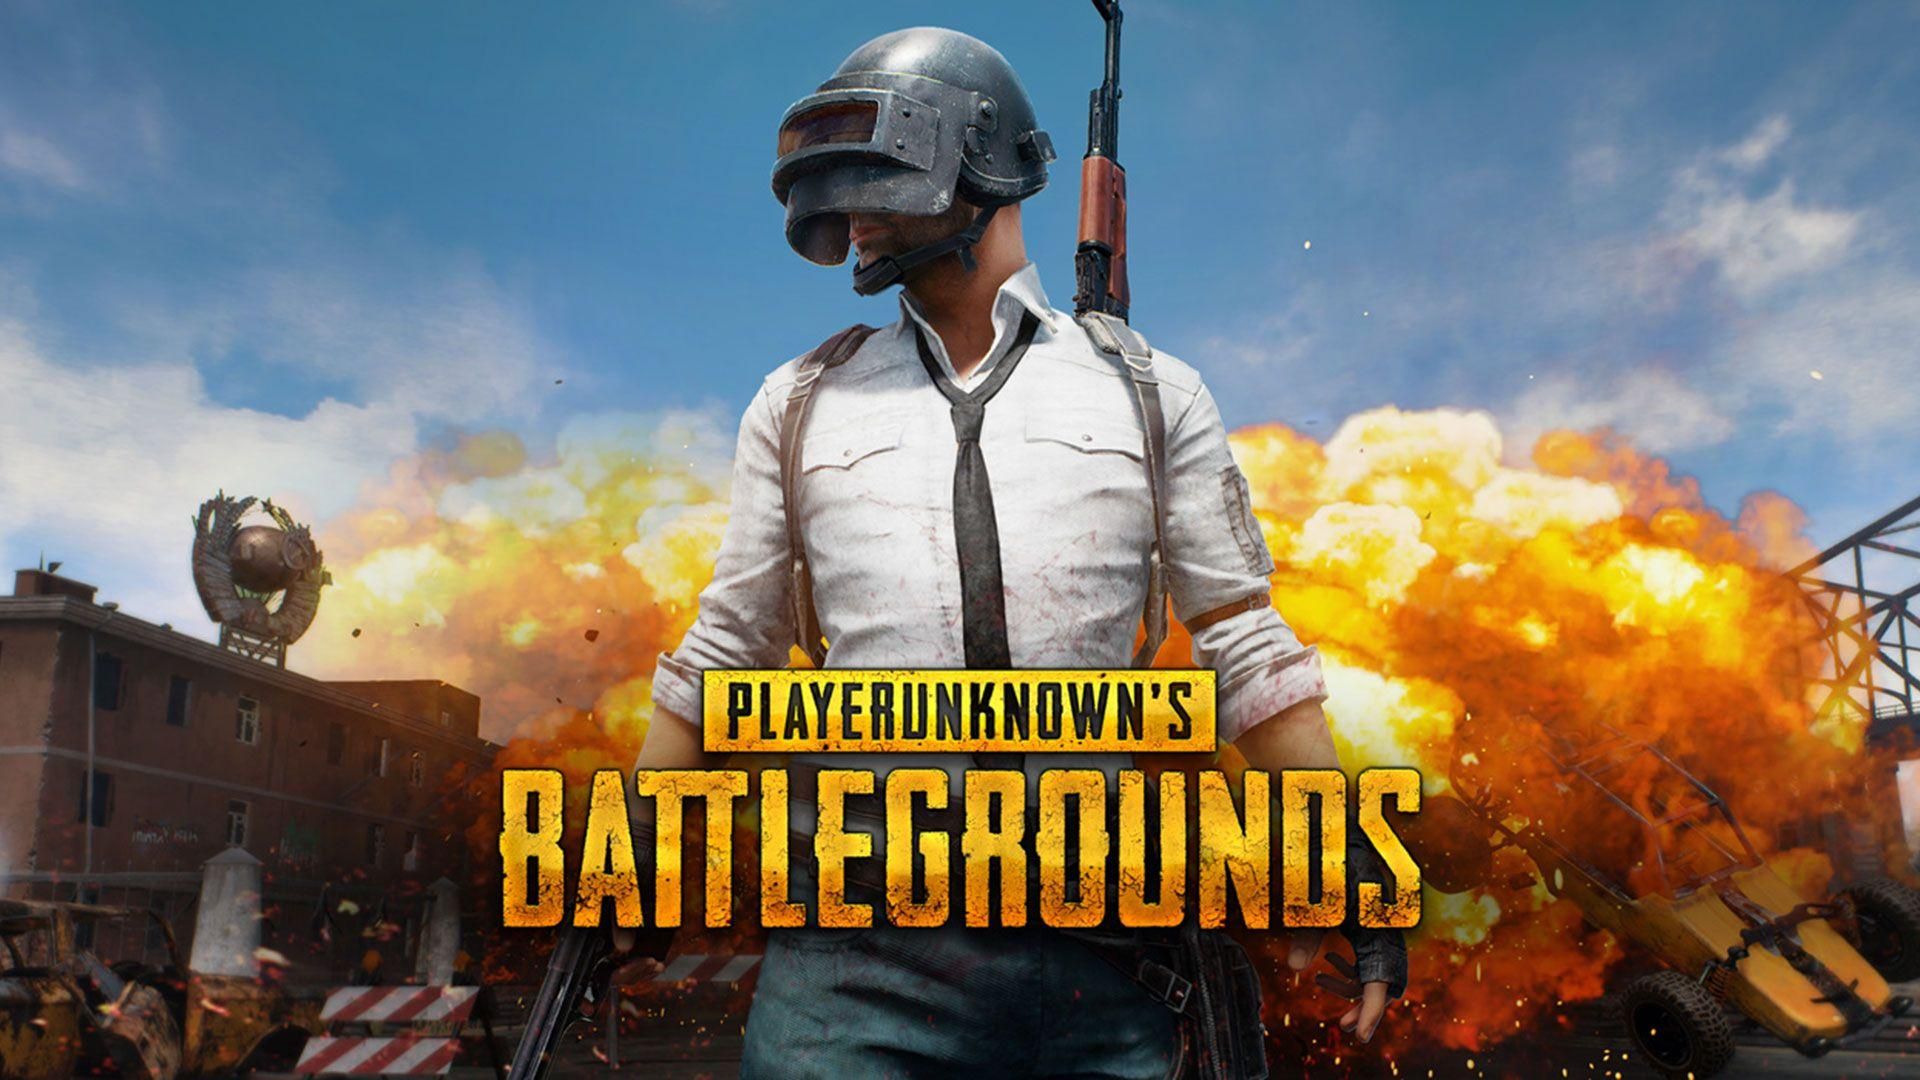 PUBG: Battlegrounds to Go Free-to-Play in January, Three Pre-Launch Events Announced With In-Game Rewards